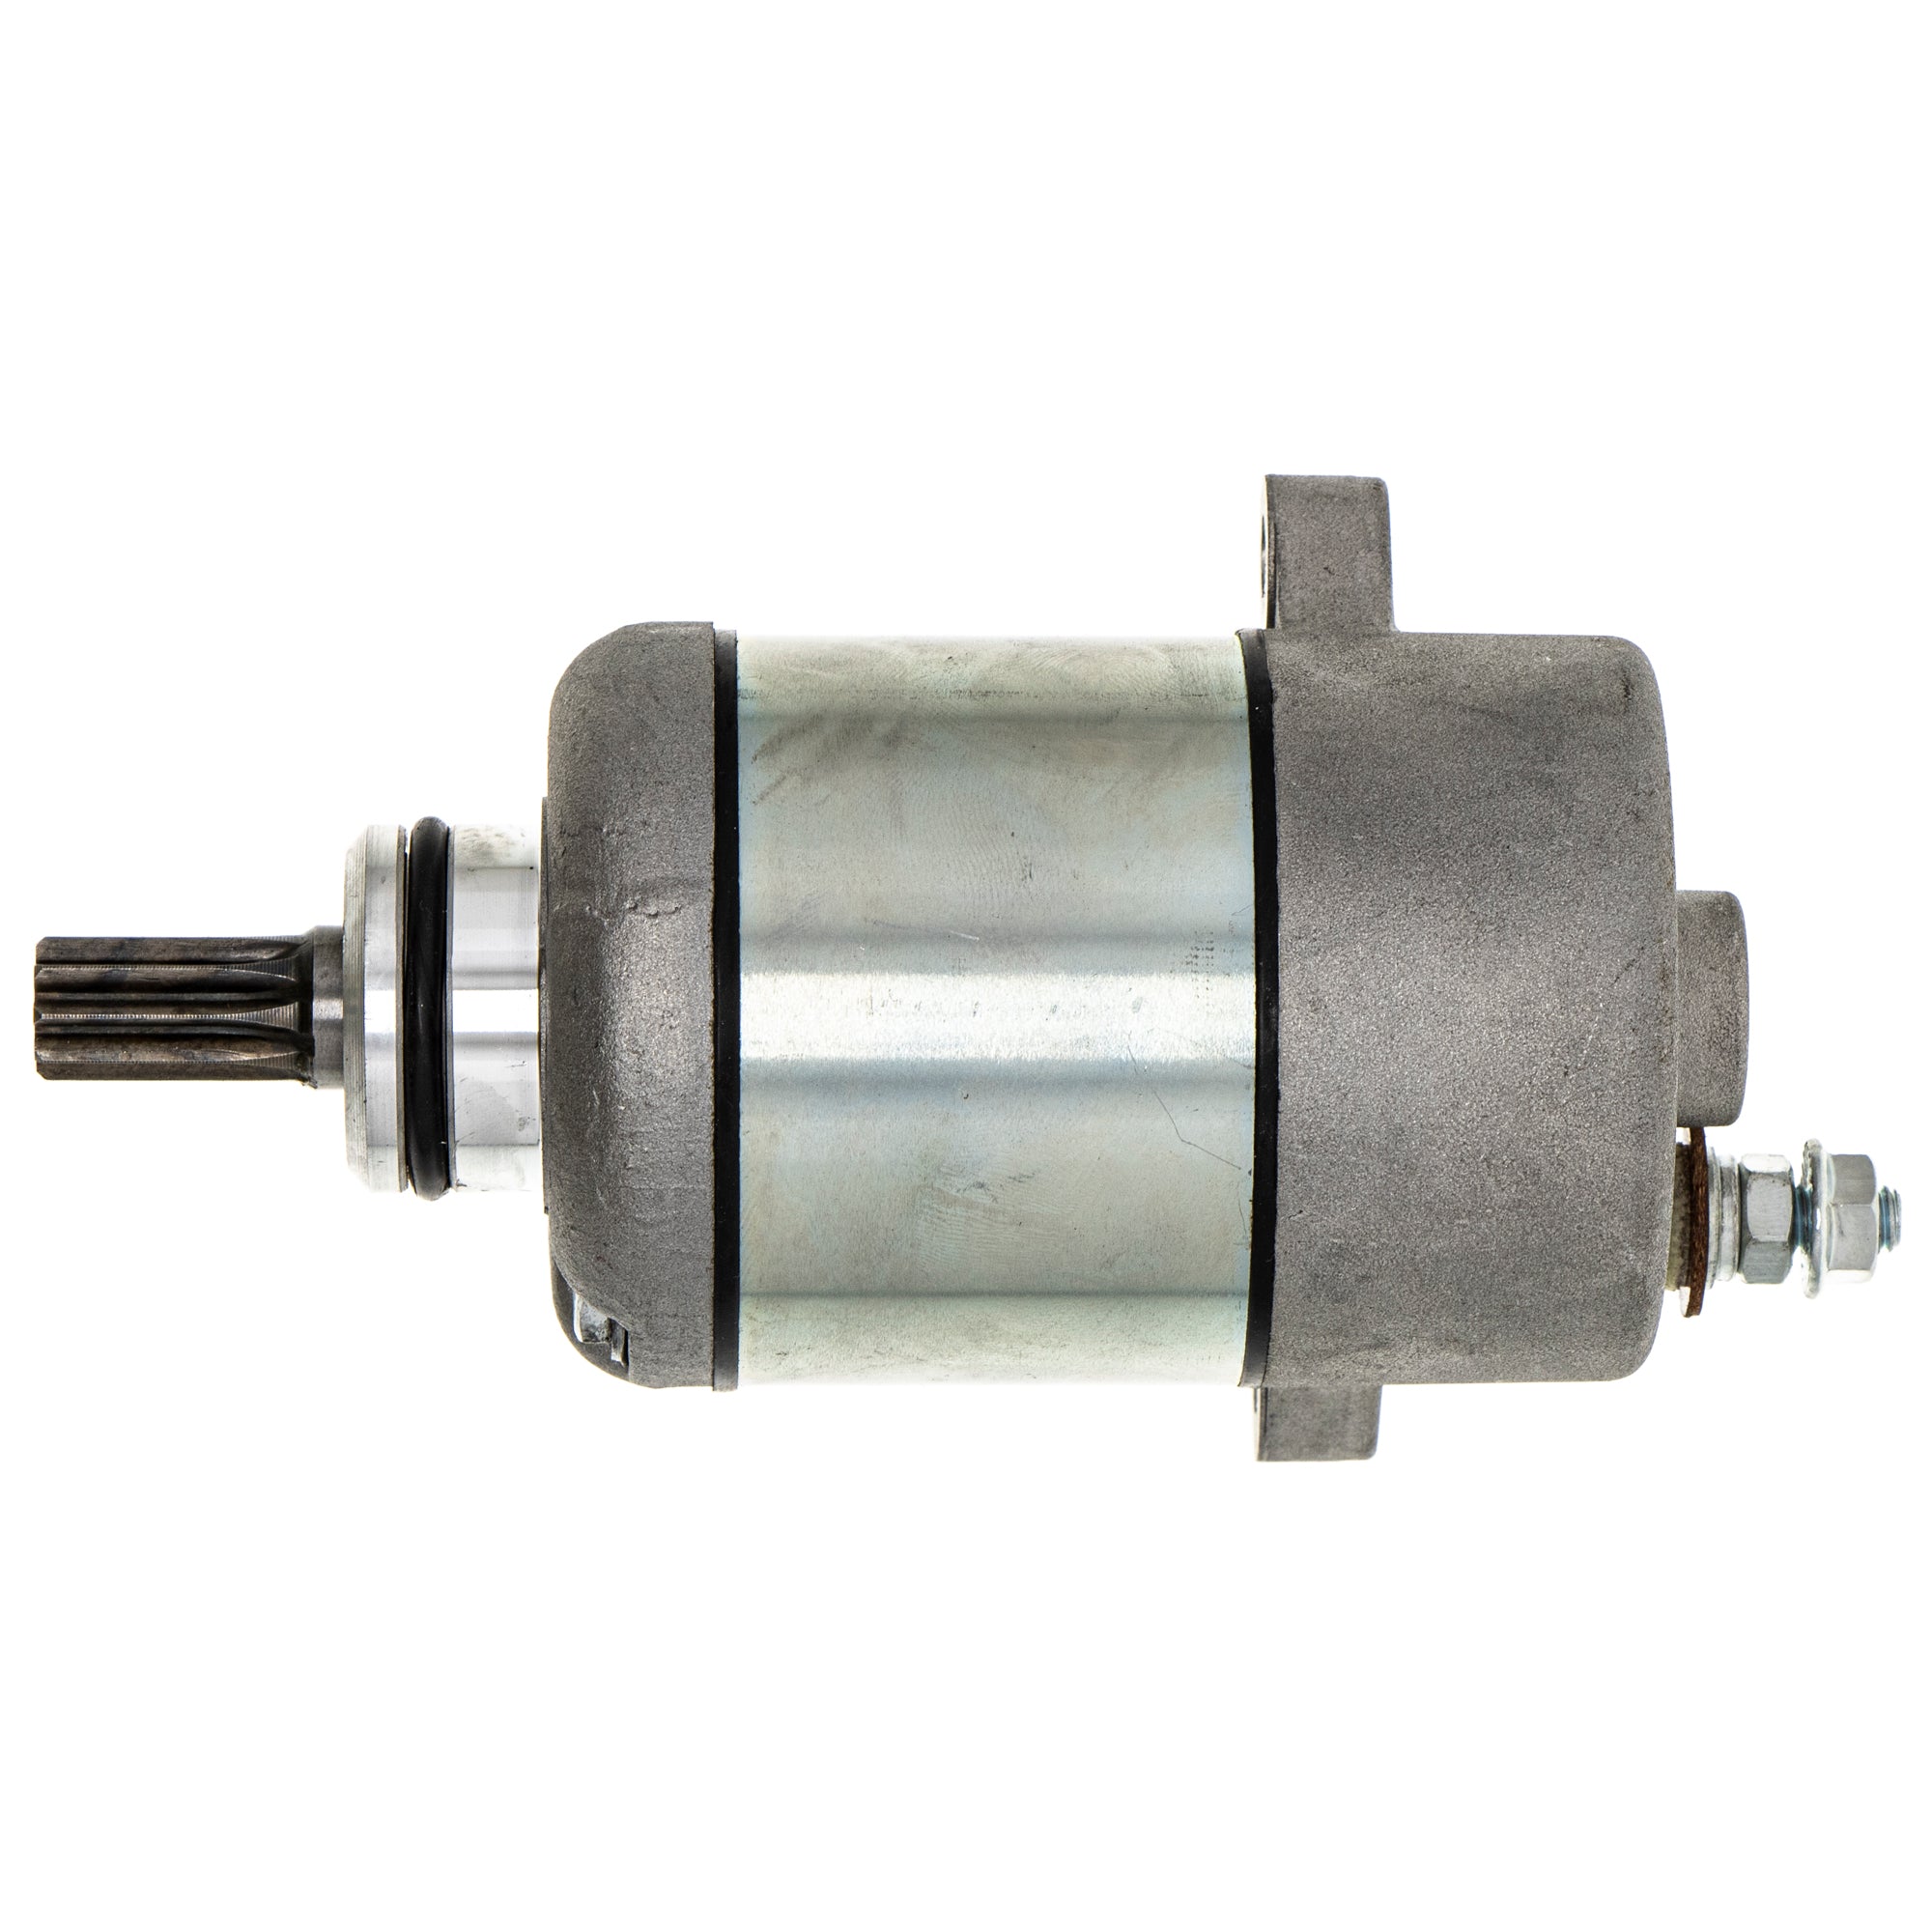 NICHE 519-CSM2475O Starter Motor Assembly for zOTHER Super